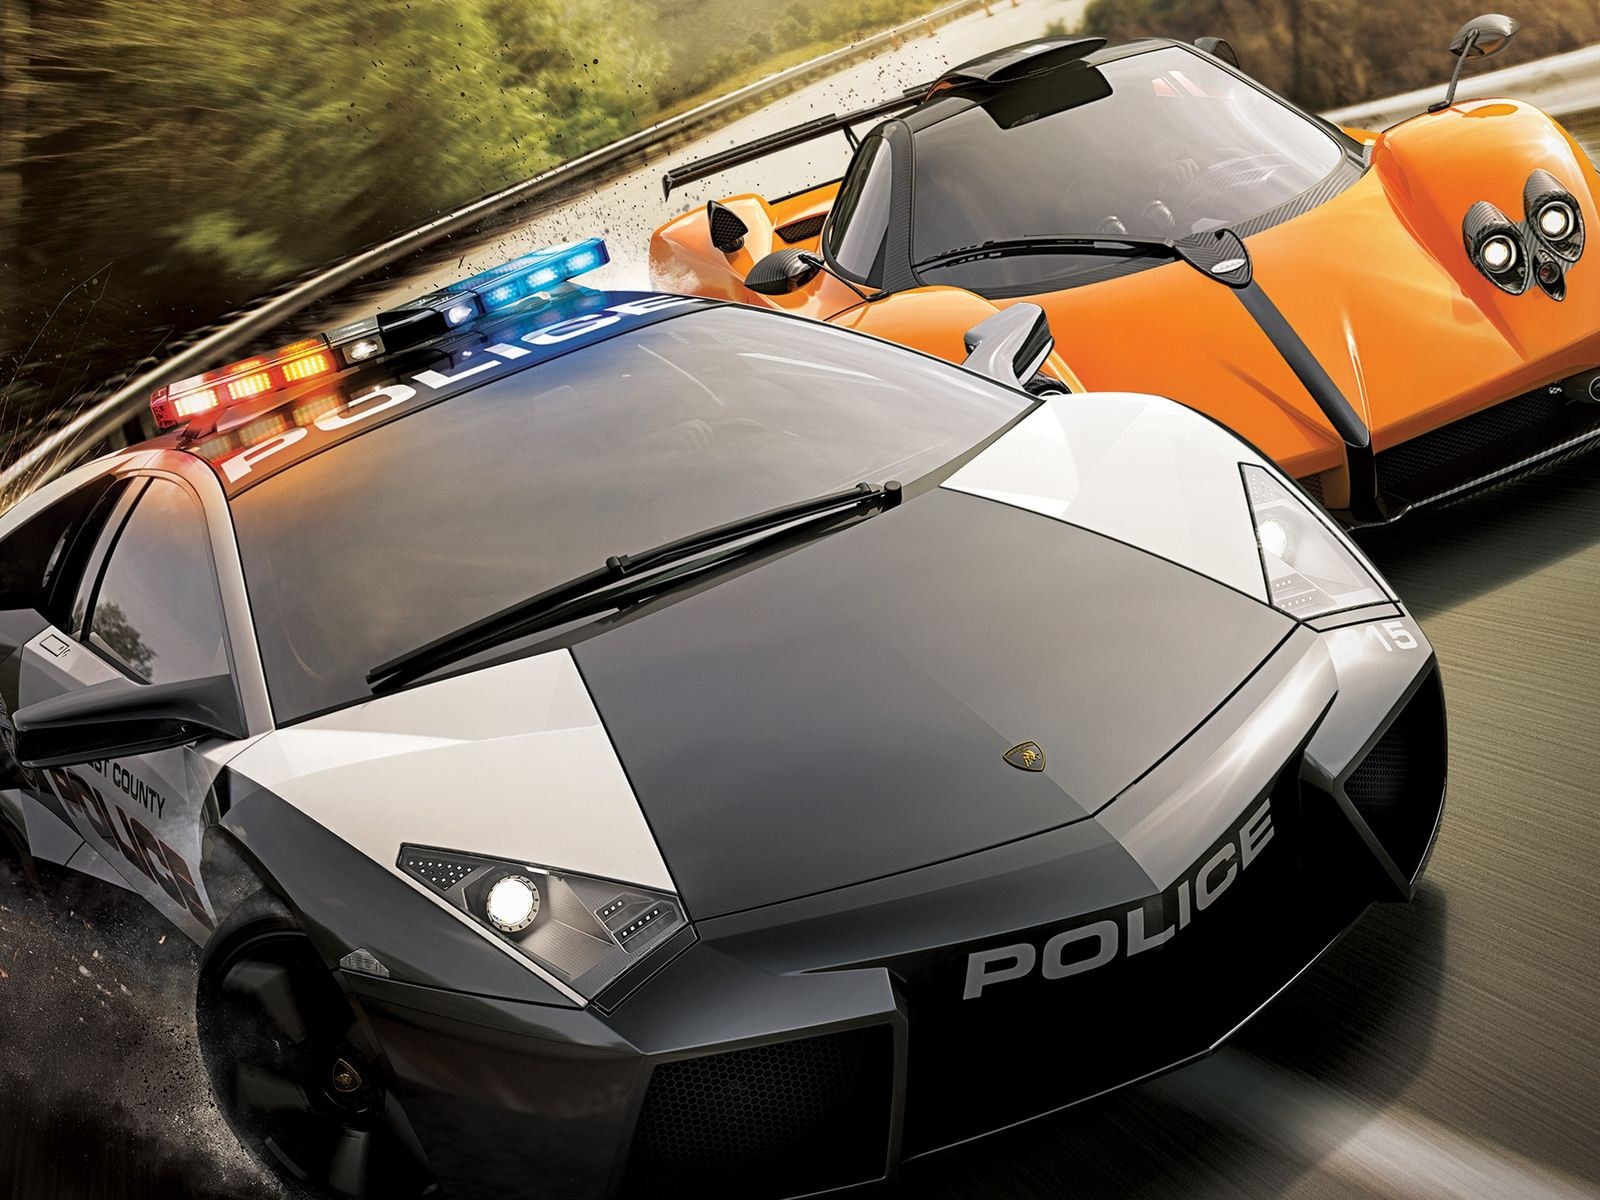 Need for Speed: Hot Pursuit 極品飛車14：熱力追踪 #3 - 1600x1200